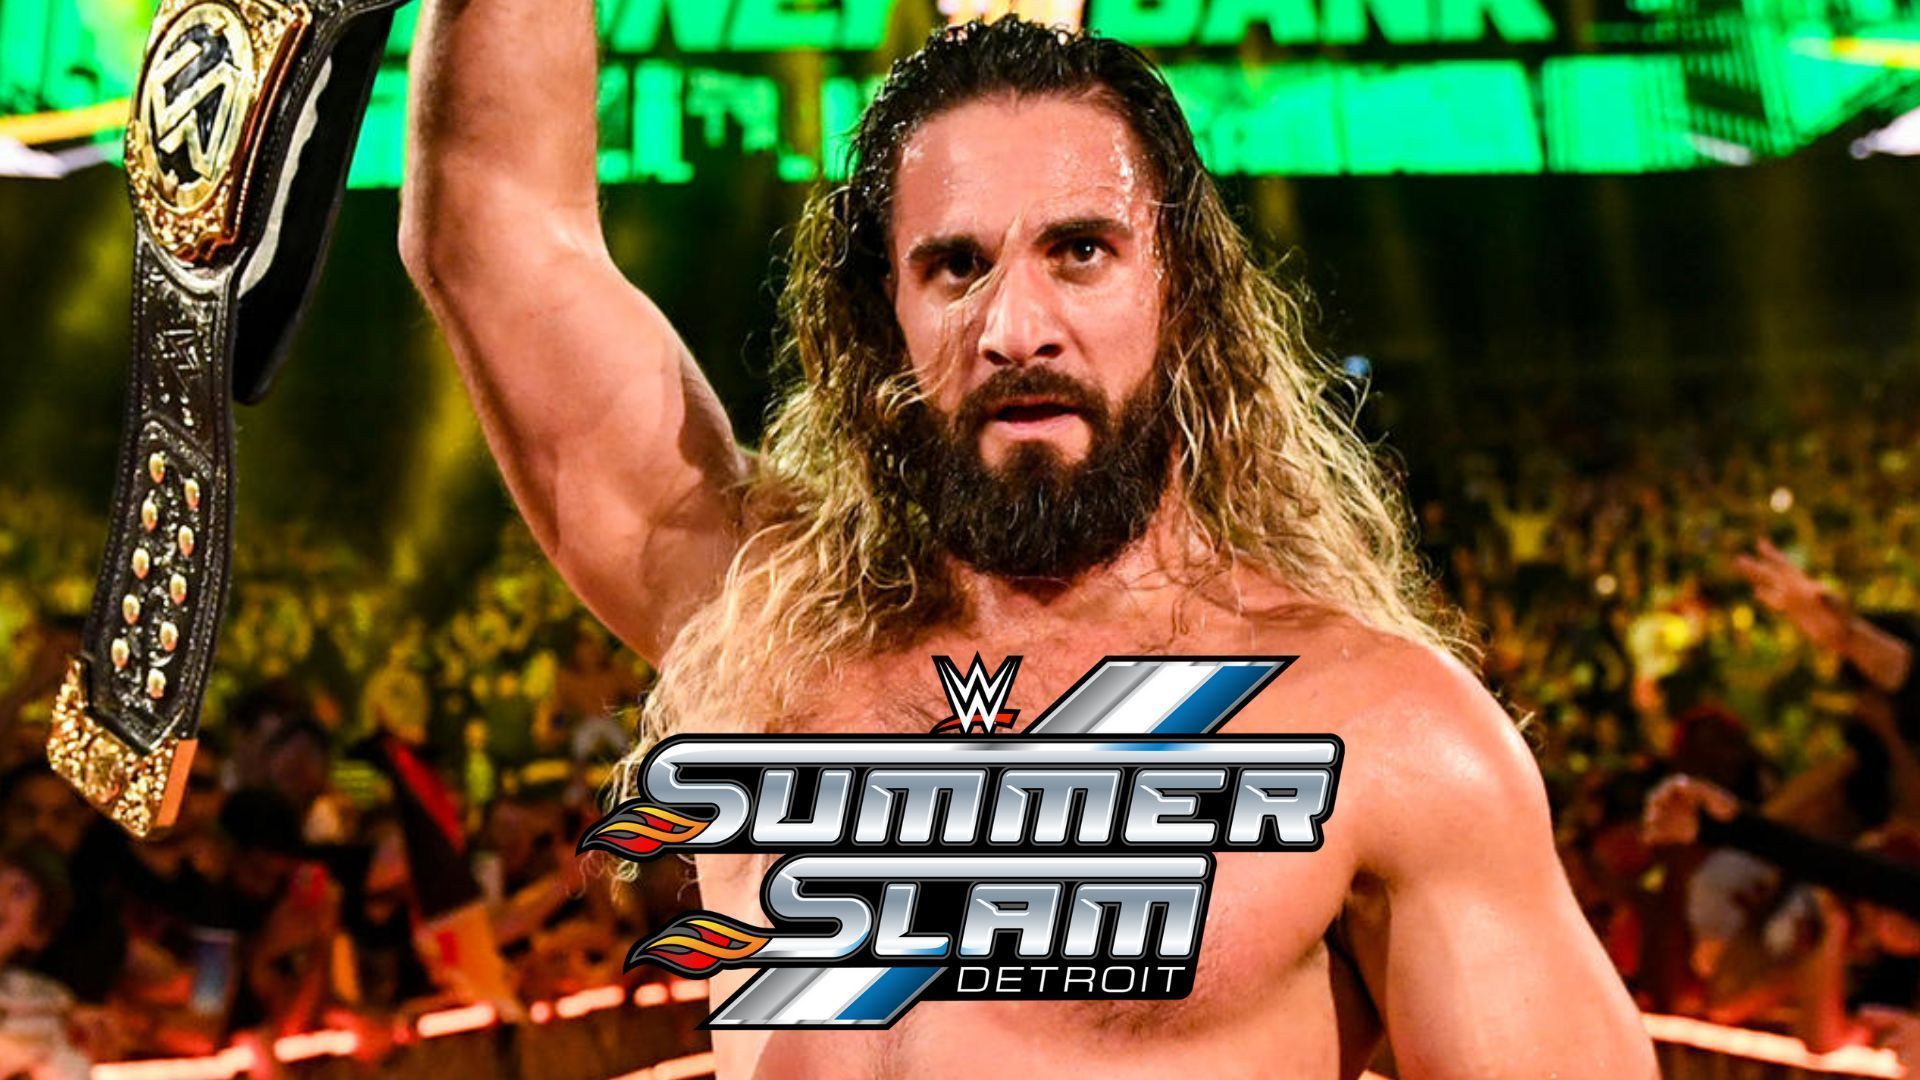 Seth Rollins has not one, but two, major threats at WWE SummerSlam